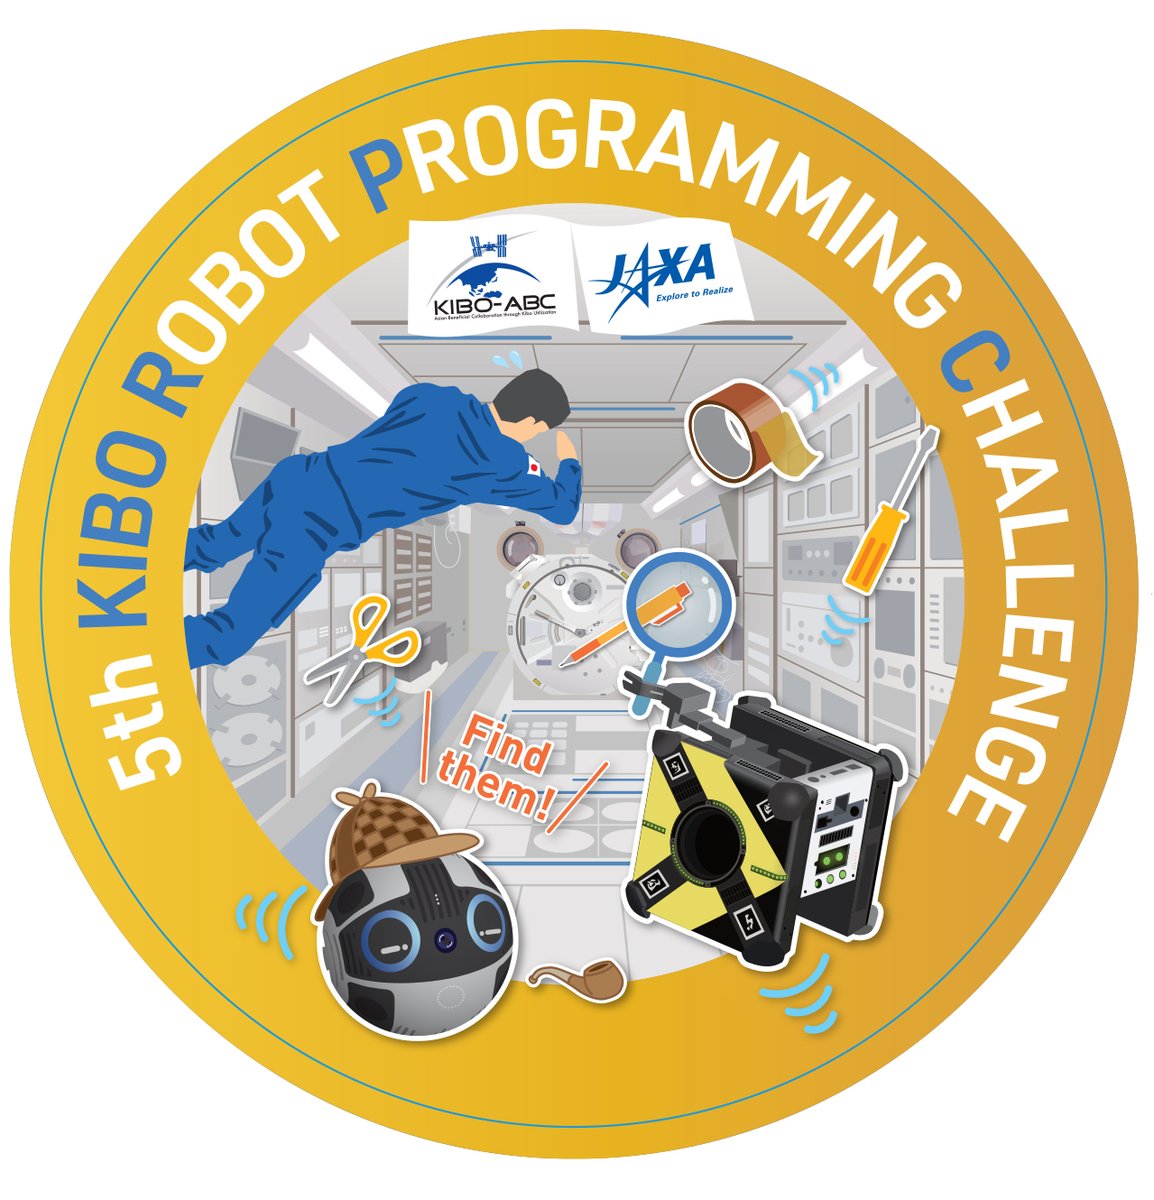 Registration is open for the fifth Kibo Robot Programming Challenge! This program is supported by @JAXA_en and @AusSpaceAgency ow.ly/SeRh50R2U45 #kiborpc #stem #space #jaxa #education #iss